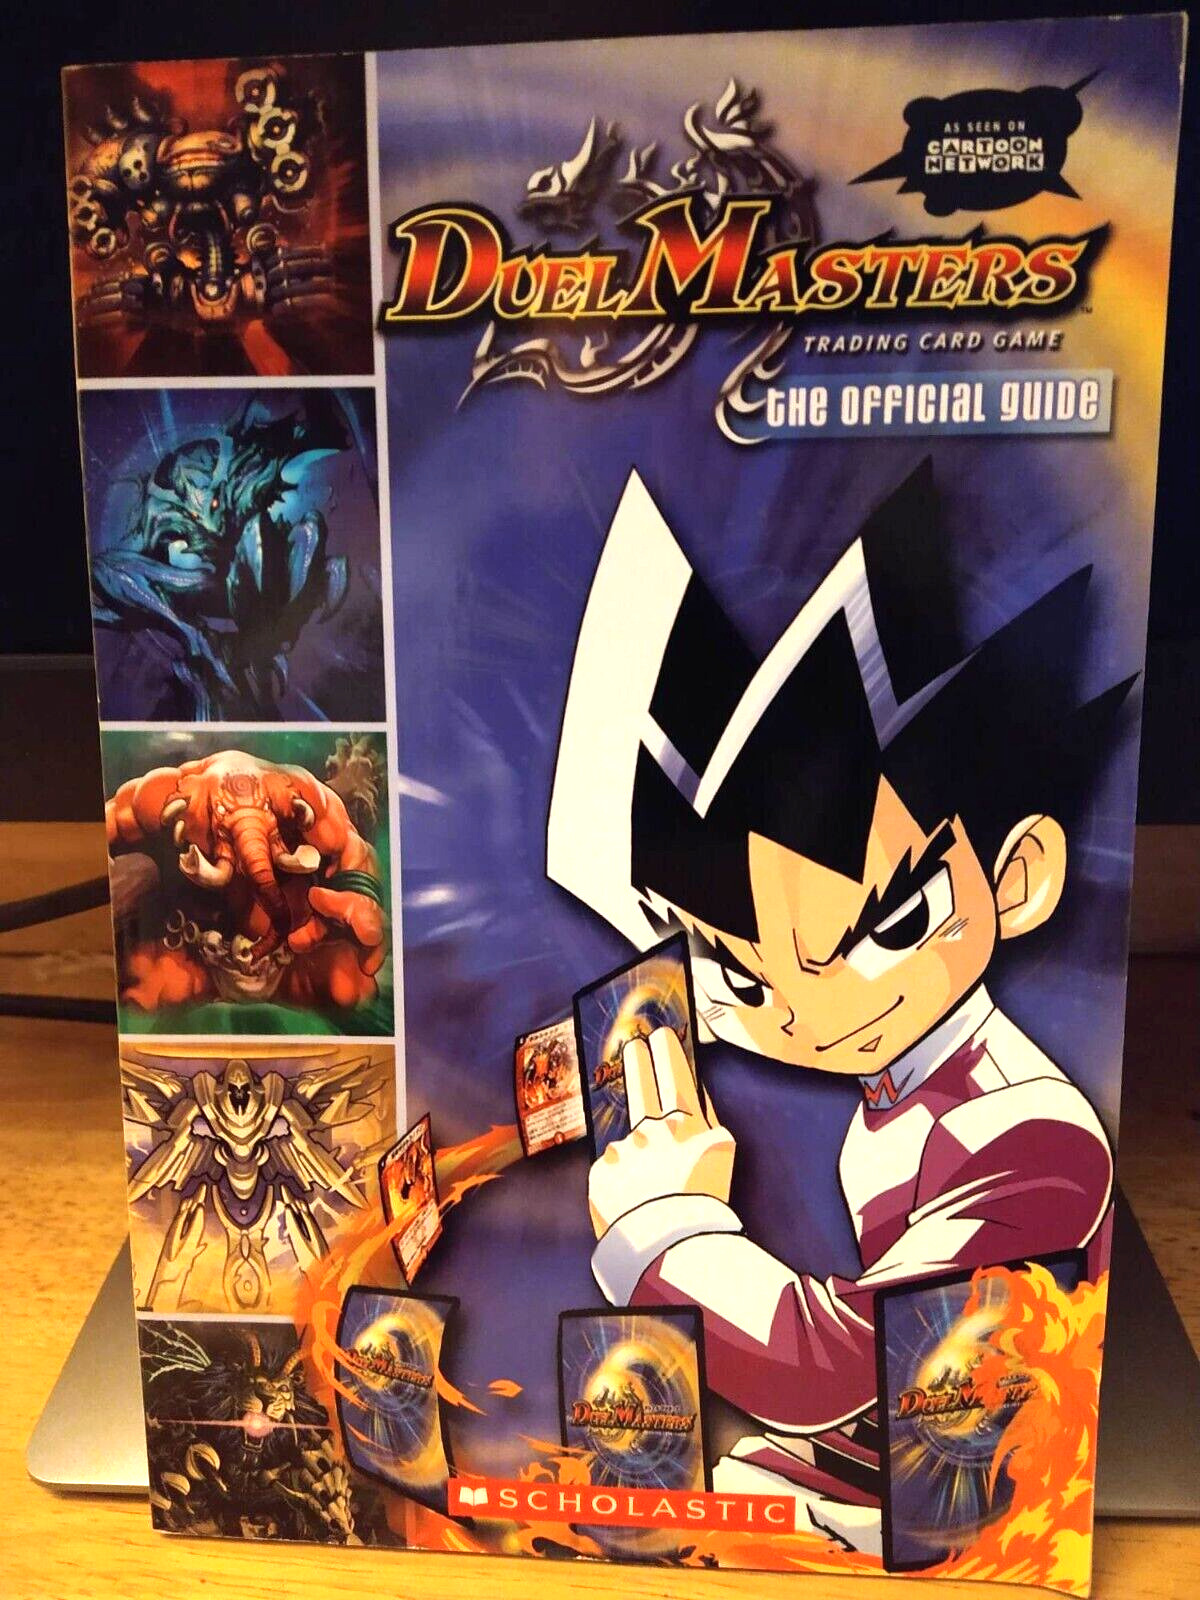 DUEL MASTERS TRADING CARD GAME THE OFFICIAL GUIDE BOOK Scholastic